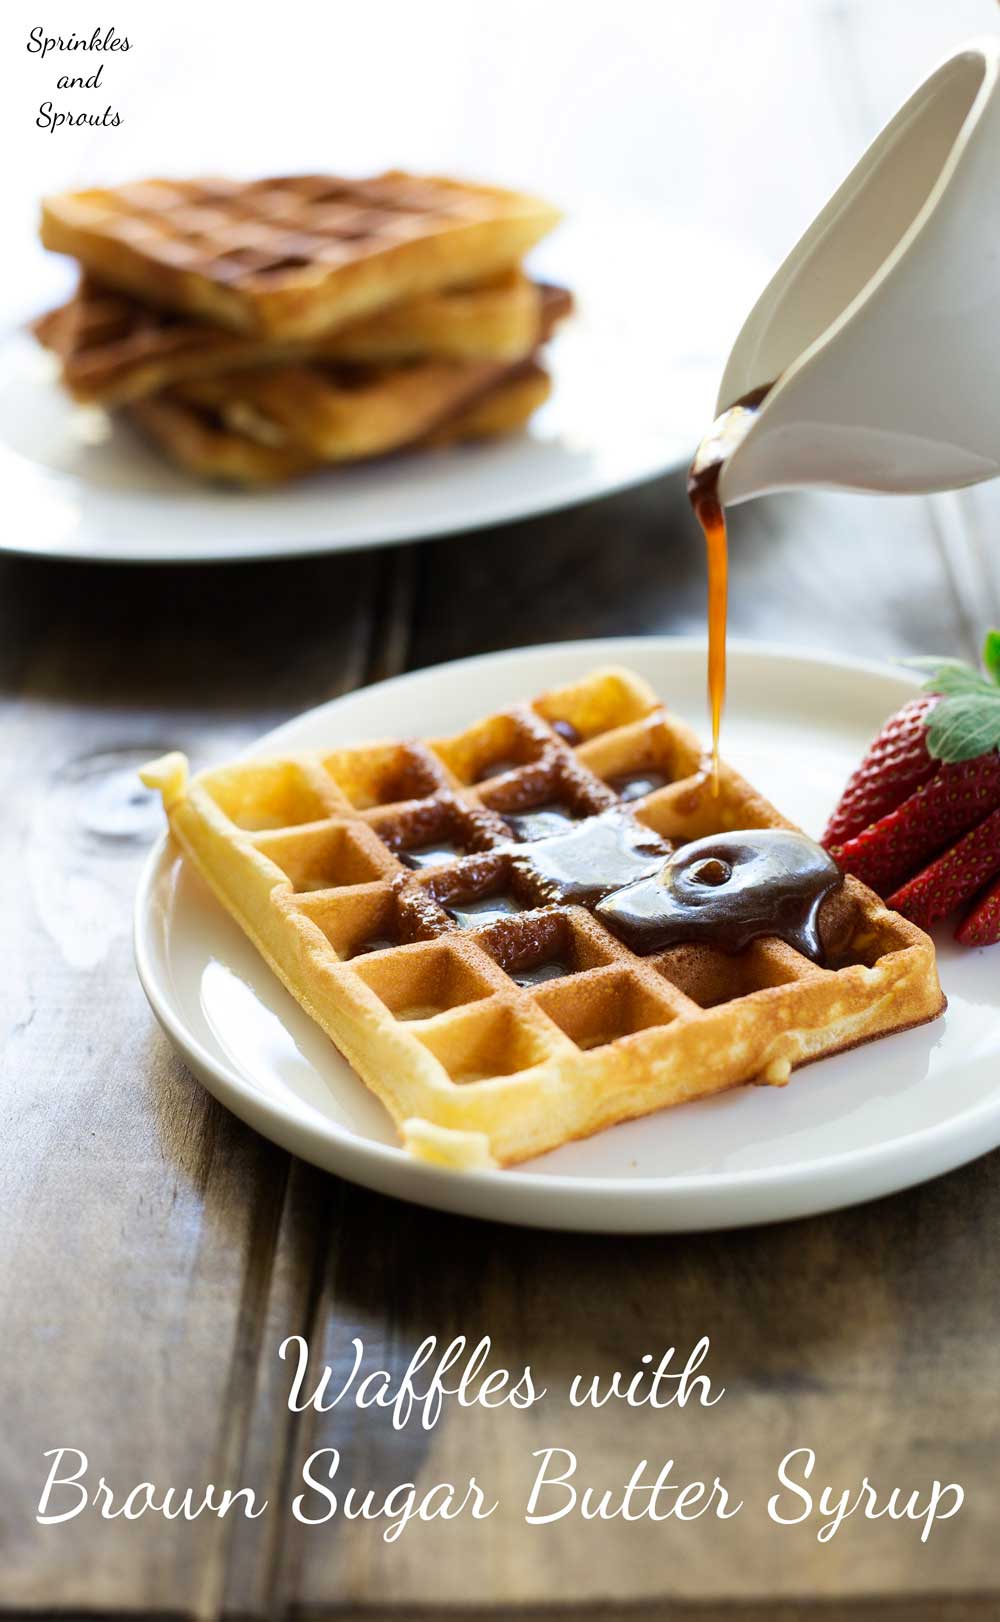 Waffles with Brown Sugar Butter Syrup. Soft, fluffy waffles drizzled generously in a rich brown sugar butter syrup. Perfect for a special/weekend breakfast.